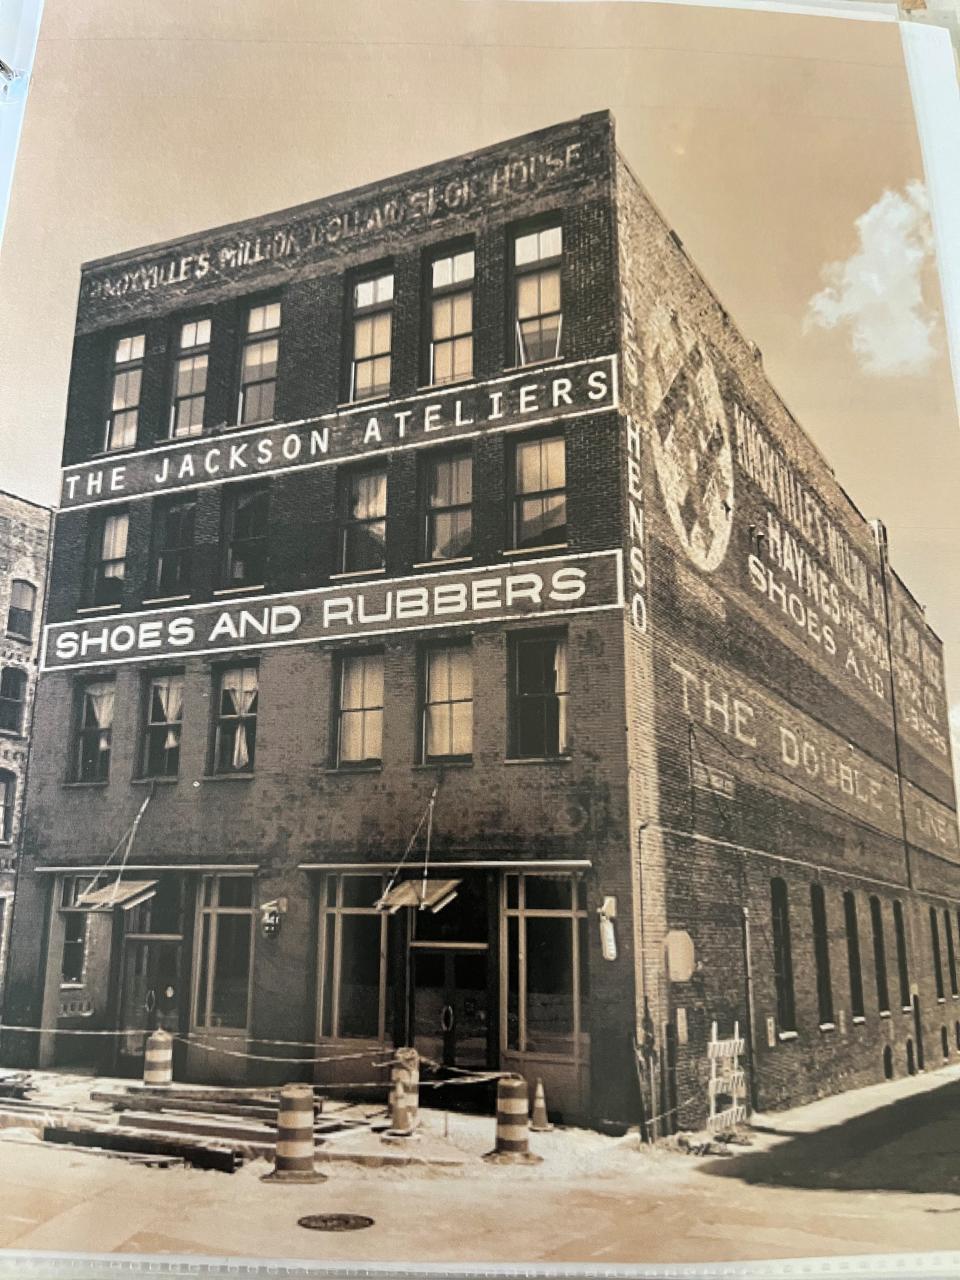 The Haynes-Henson Shoe Company warehouse building on Jackson Avenue is shown in this vintage photo. Reference to the business can be found on the top and side.